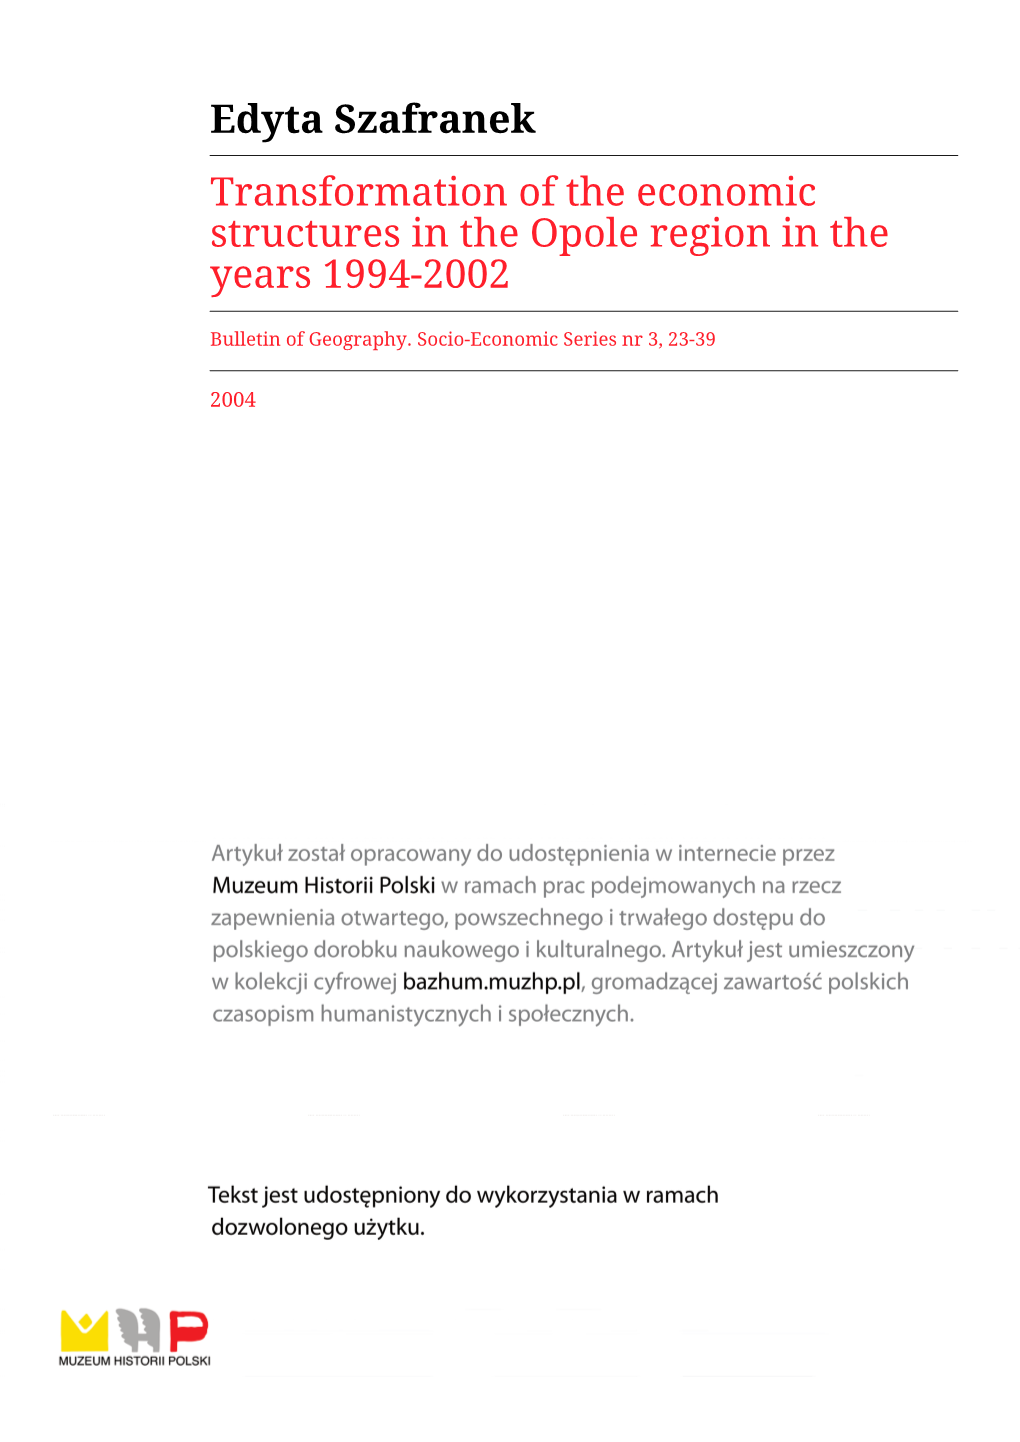 Edyta Szafranek Transformation of the Economic Structures in the Opole Region in the Years 1994-2002